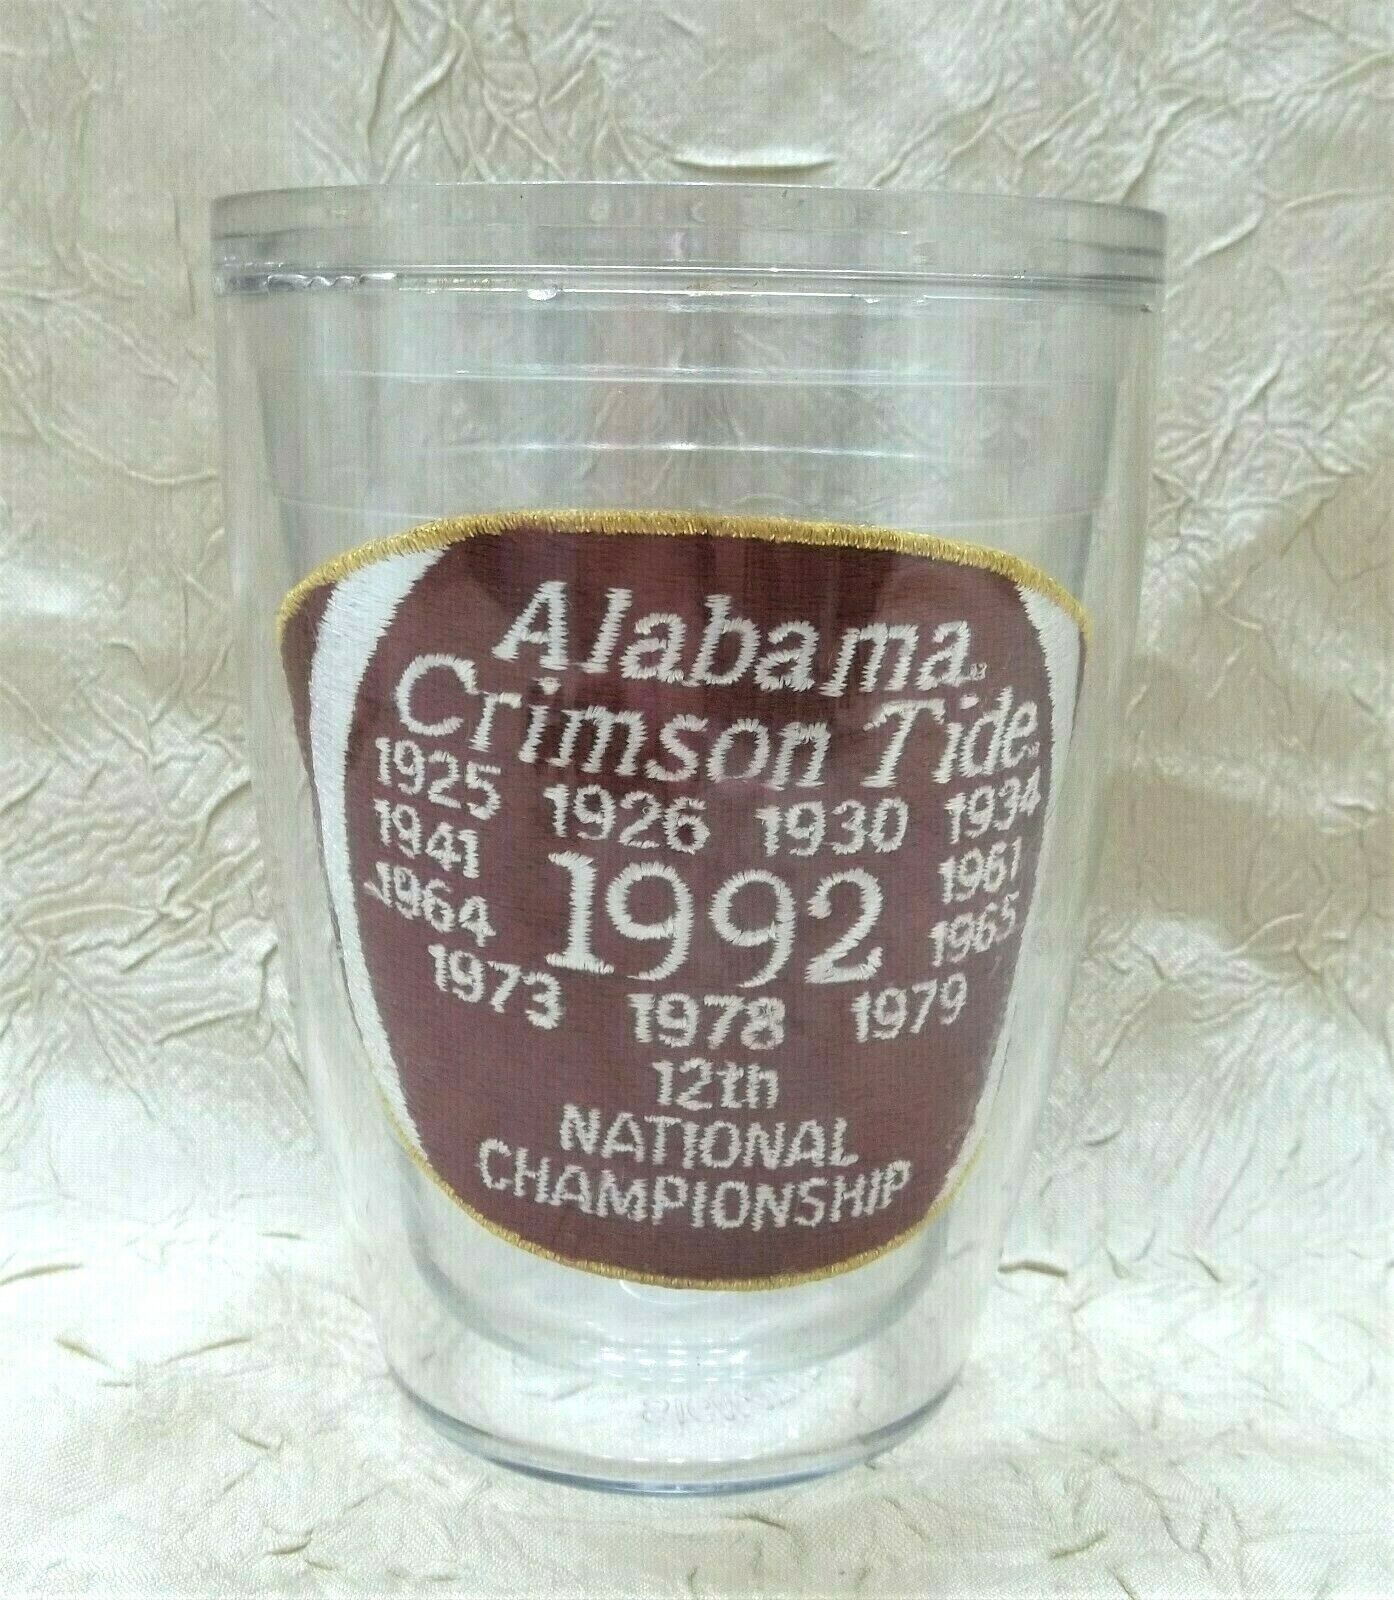 University Of Alabama National Champions Vintage 1992 Insulated Plastic Cup